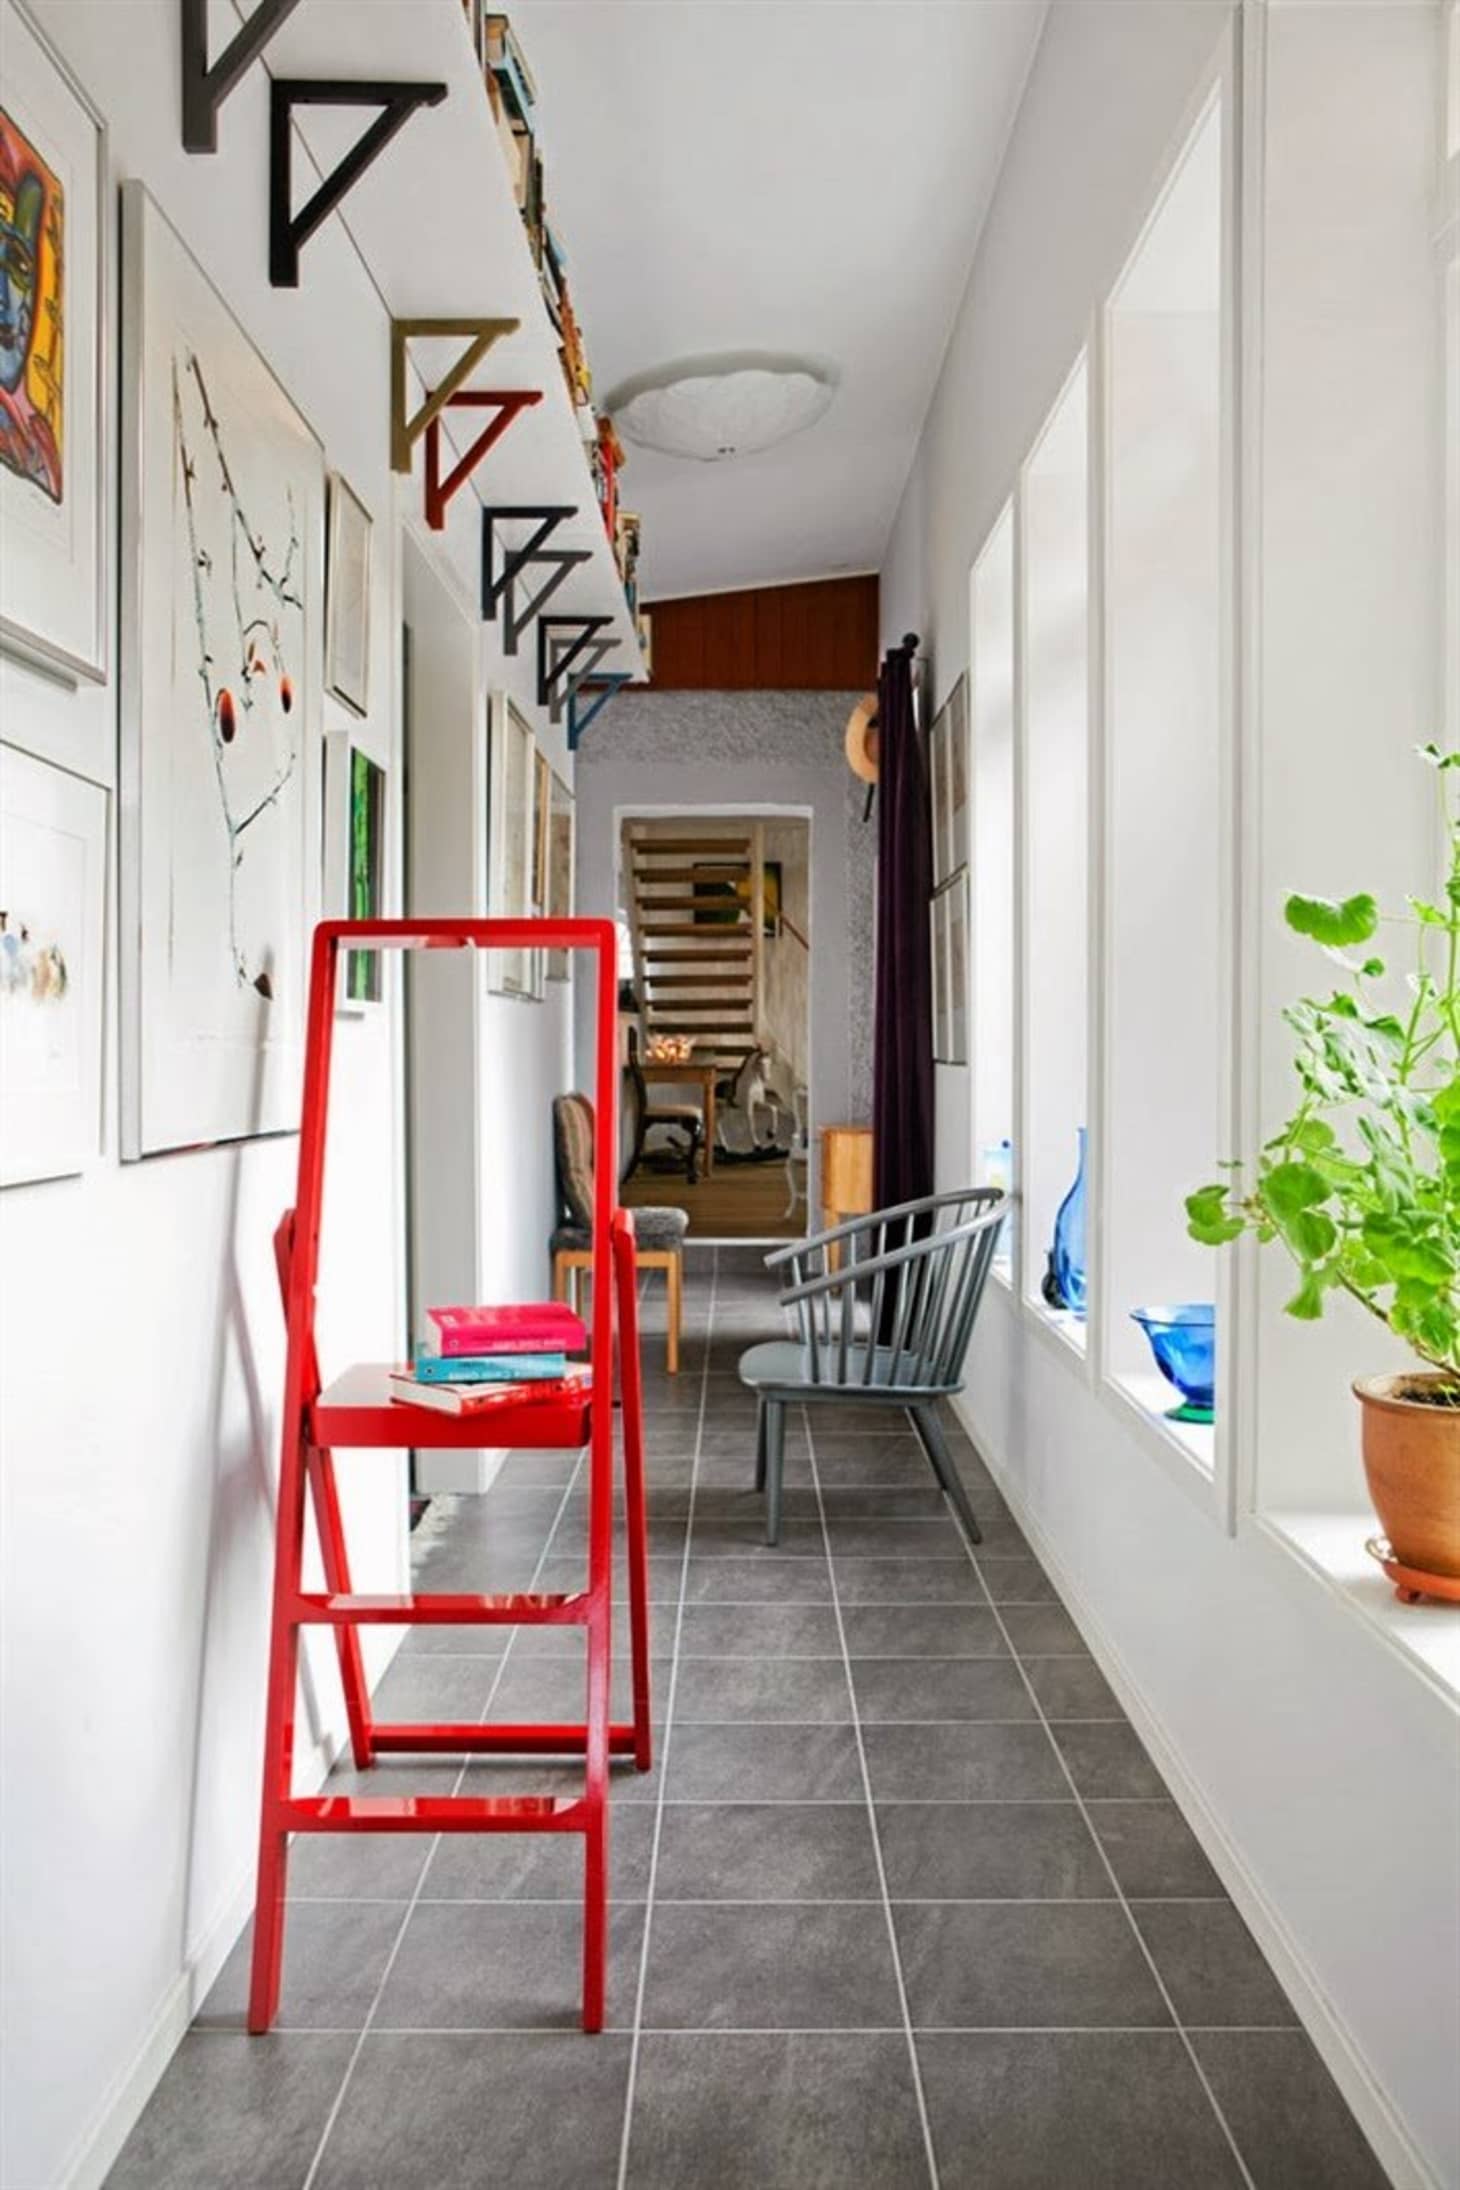 Hallway Storage Projects for Narrow & Small Spaces | Apartment Therapy